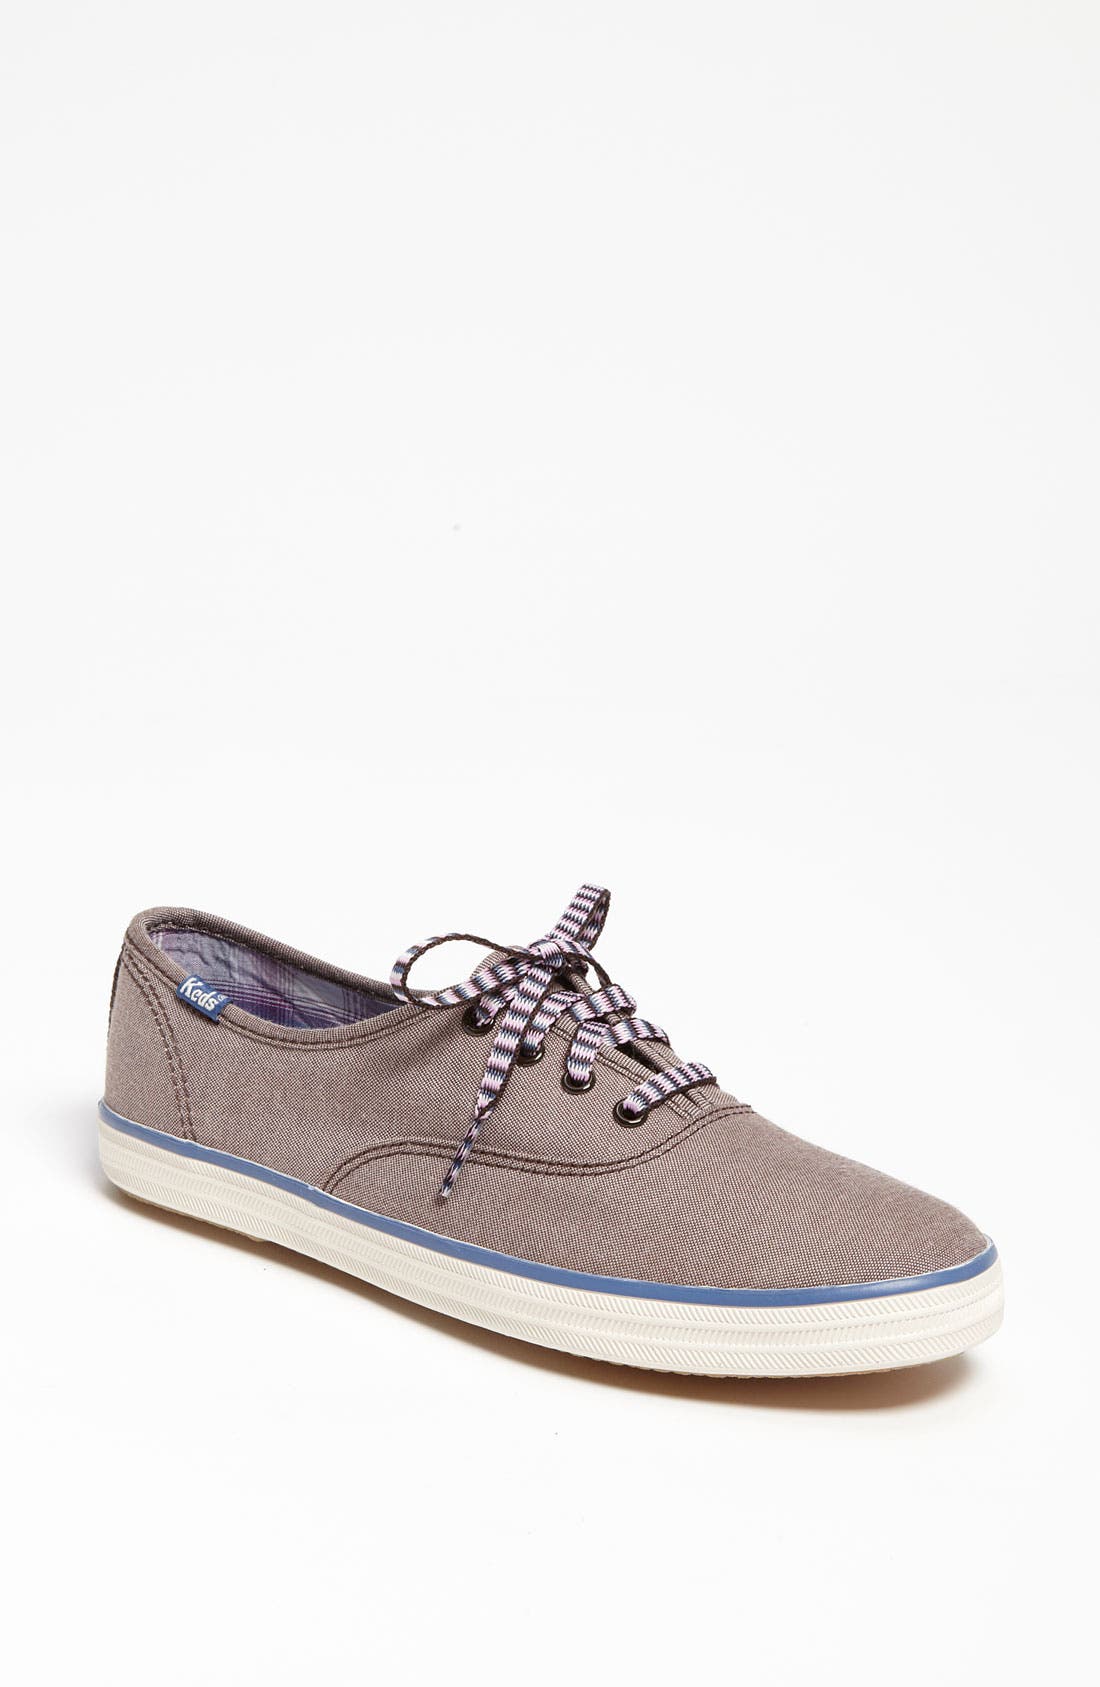 keds chambray sneakers